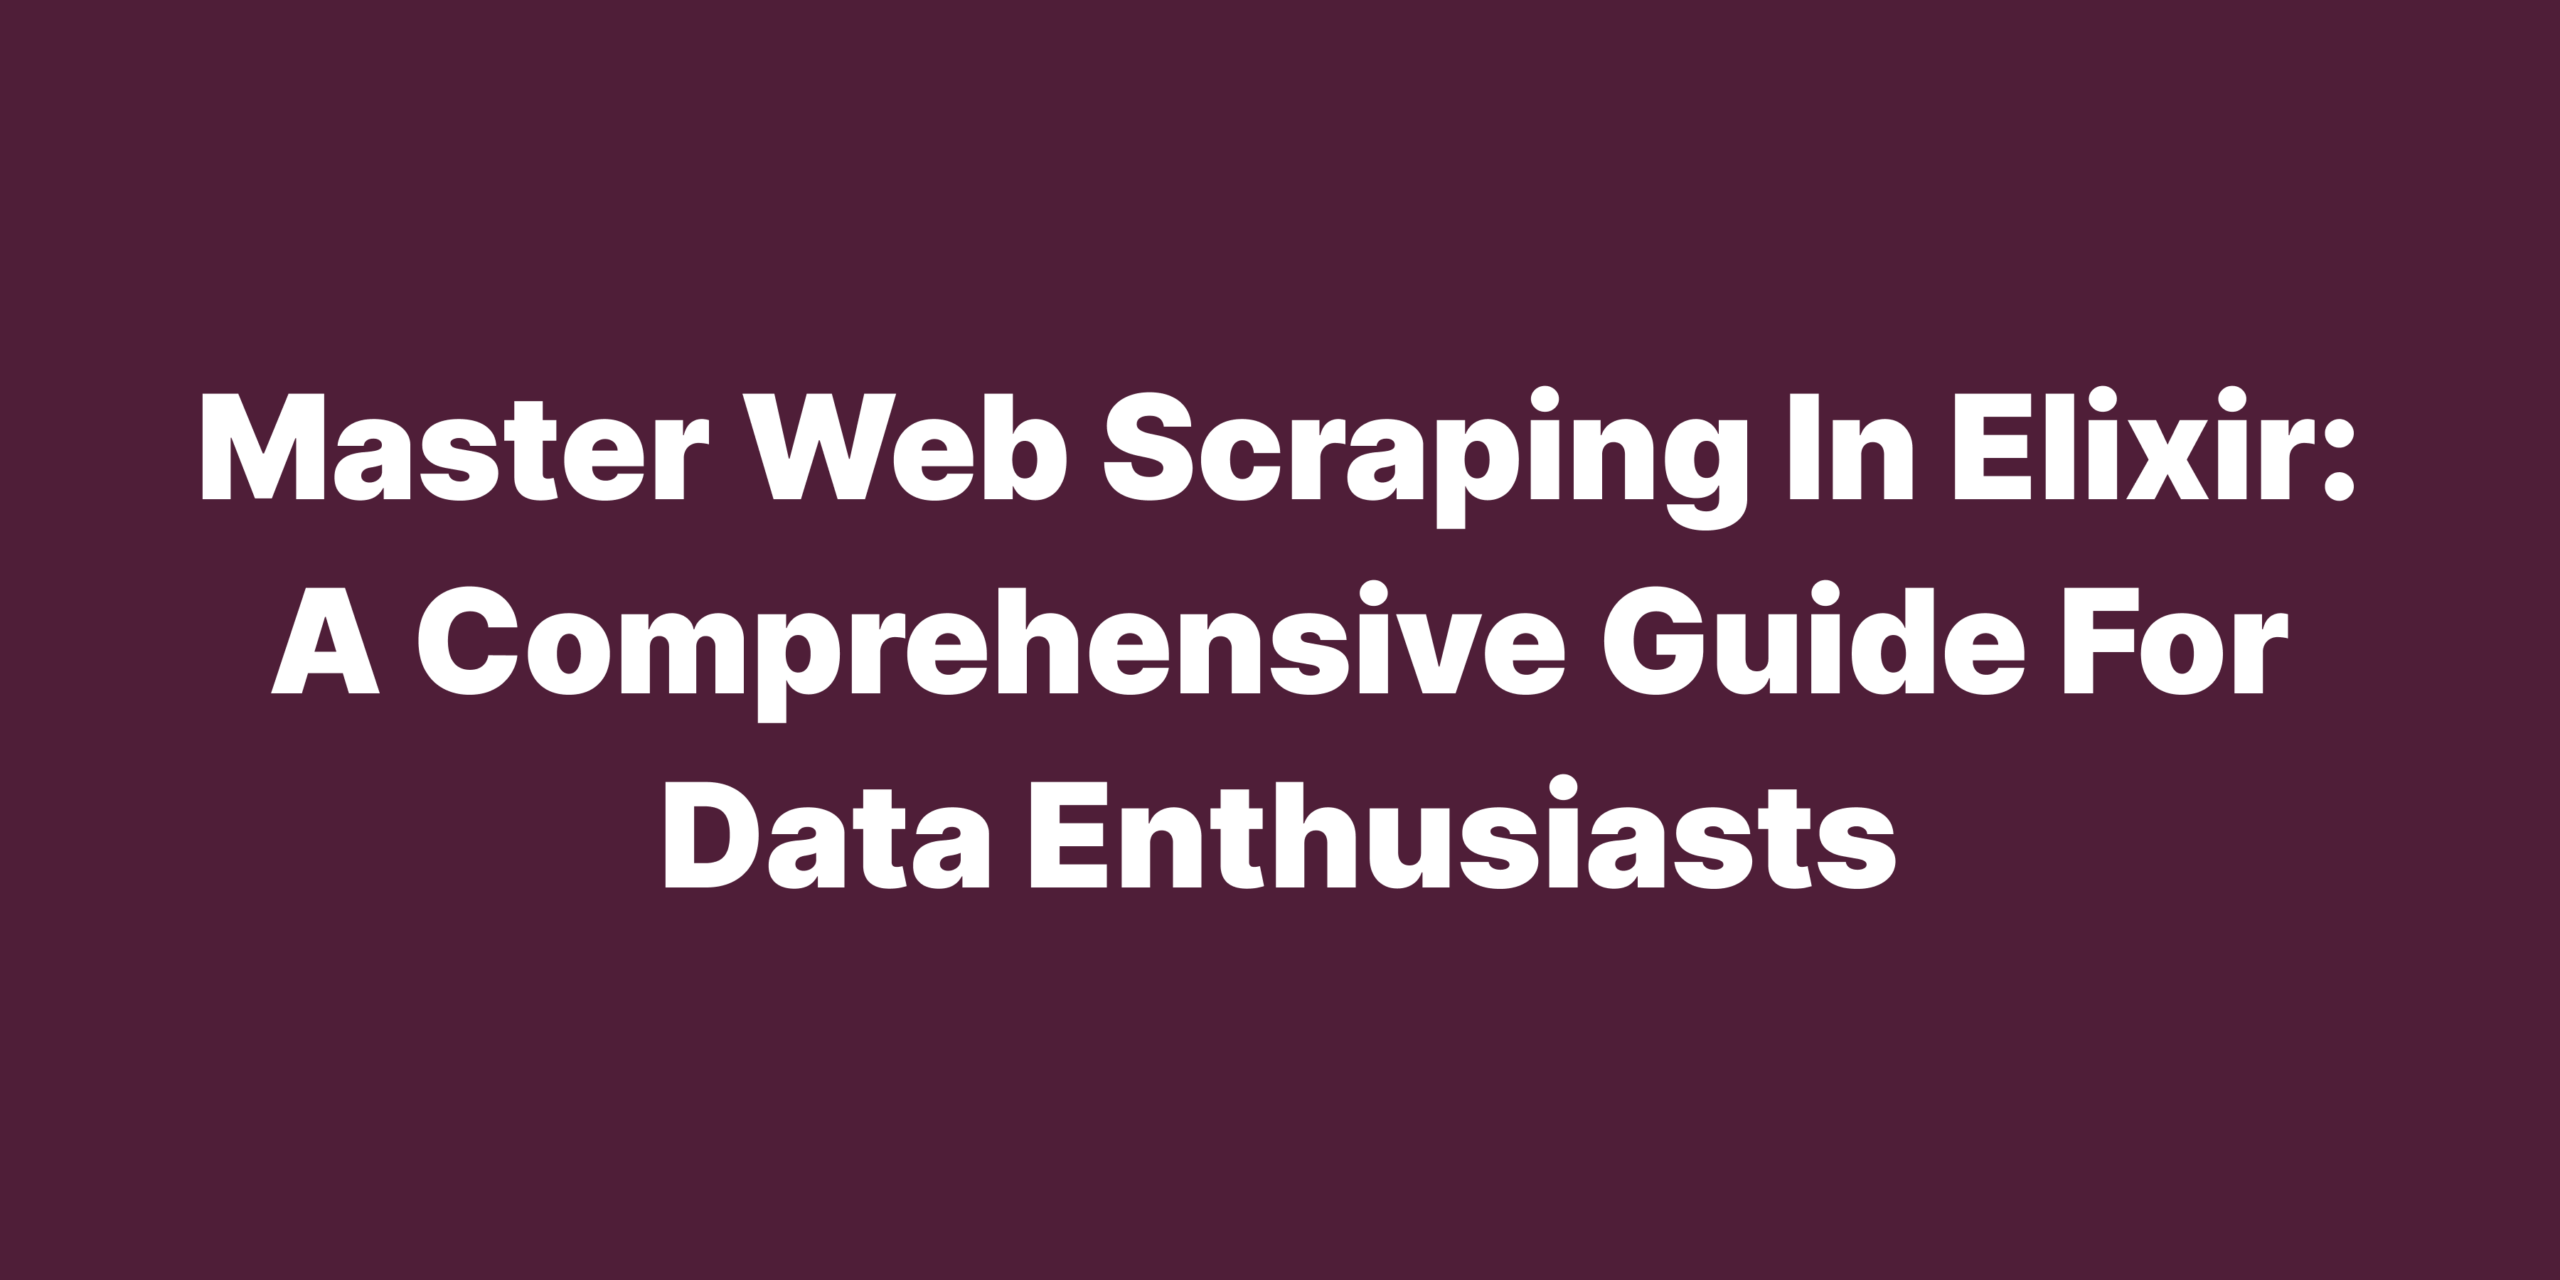 Master web scraping in Elixir A comprehensive guide for data enthusiasts